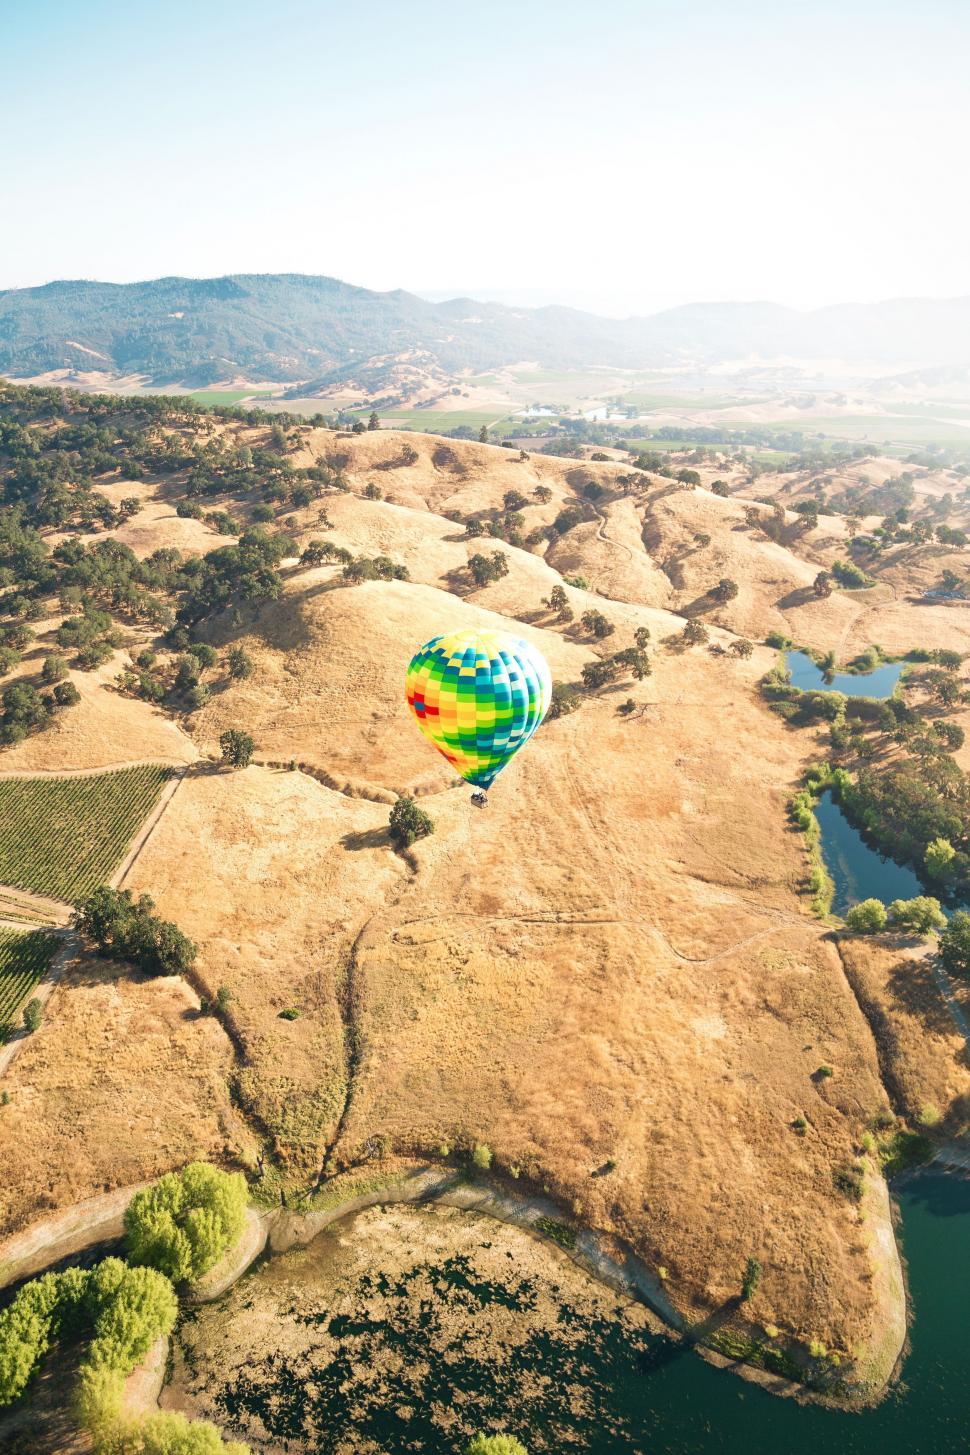 Free Image of Hot Air Balloon Soaring Over Lush Green Field 